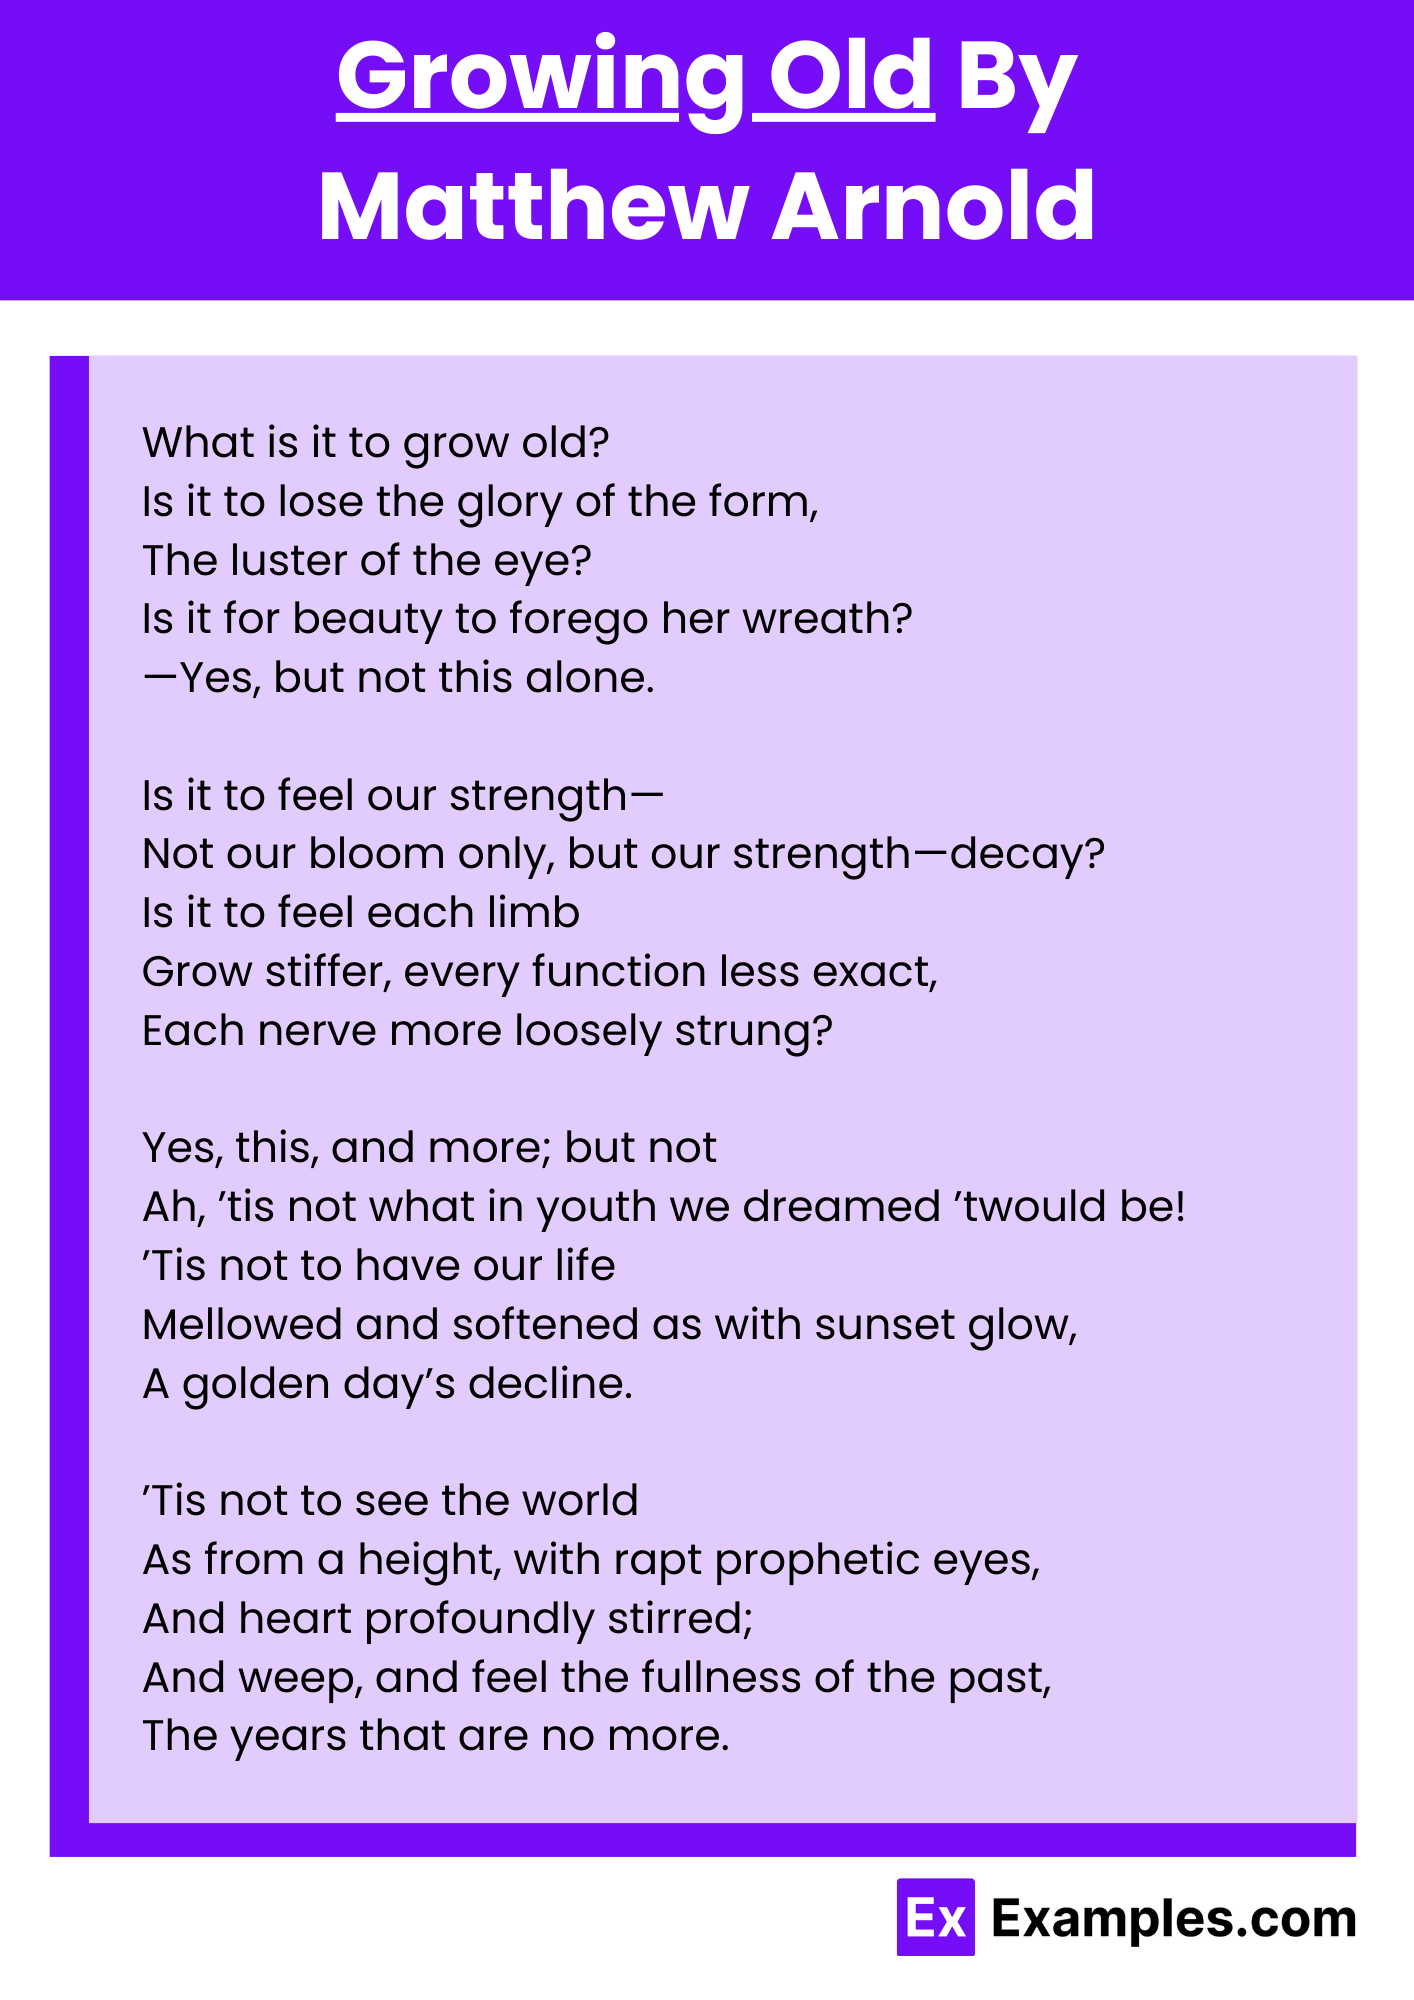 Growing Old By Matthew Arnold